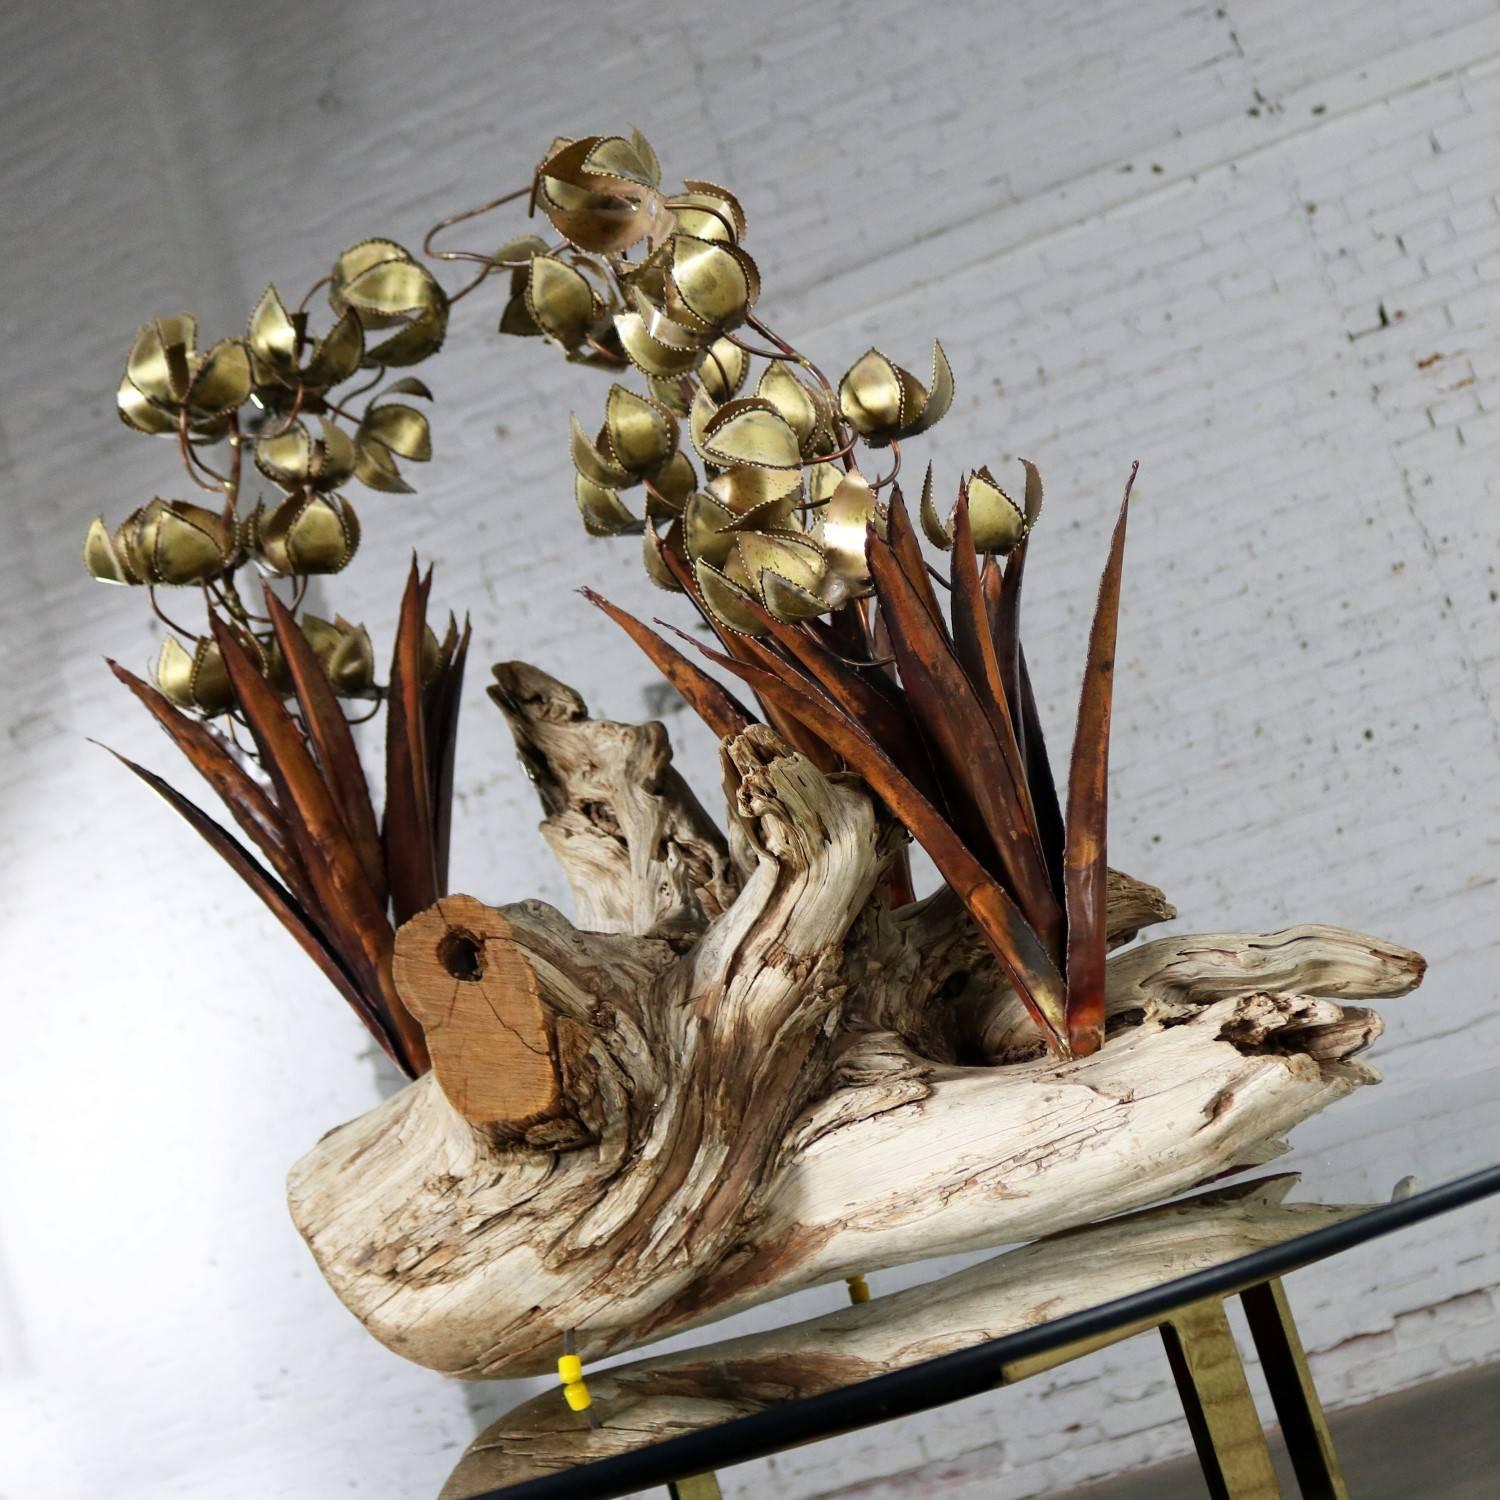 Incredible Brutalist torch cut copper and brass floral sculpture on driftwood. Unsigned but done in the style of Silas Seandel or C. Jere. It is in excellent vintage condition, circa 1970s.

This is the most stunning floral sculpture I believe I